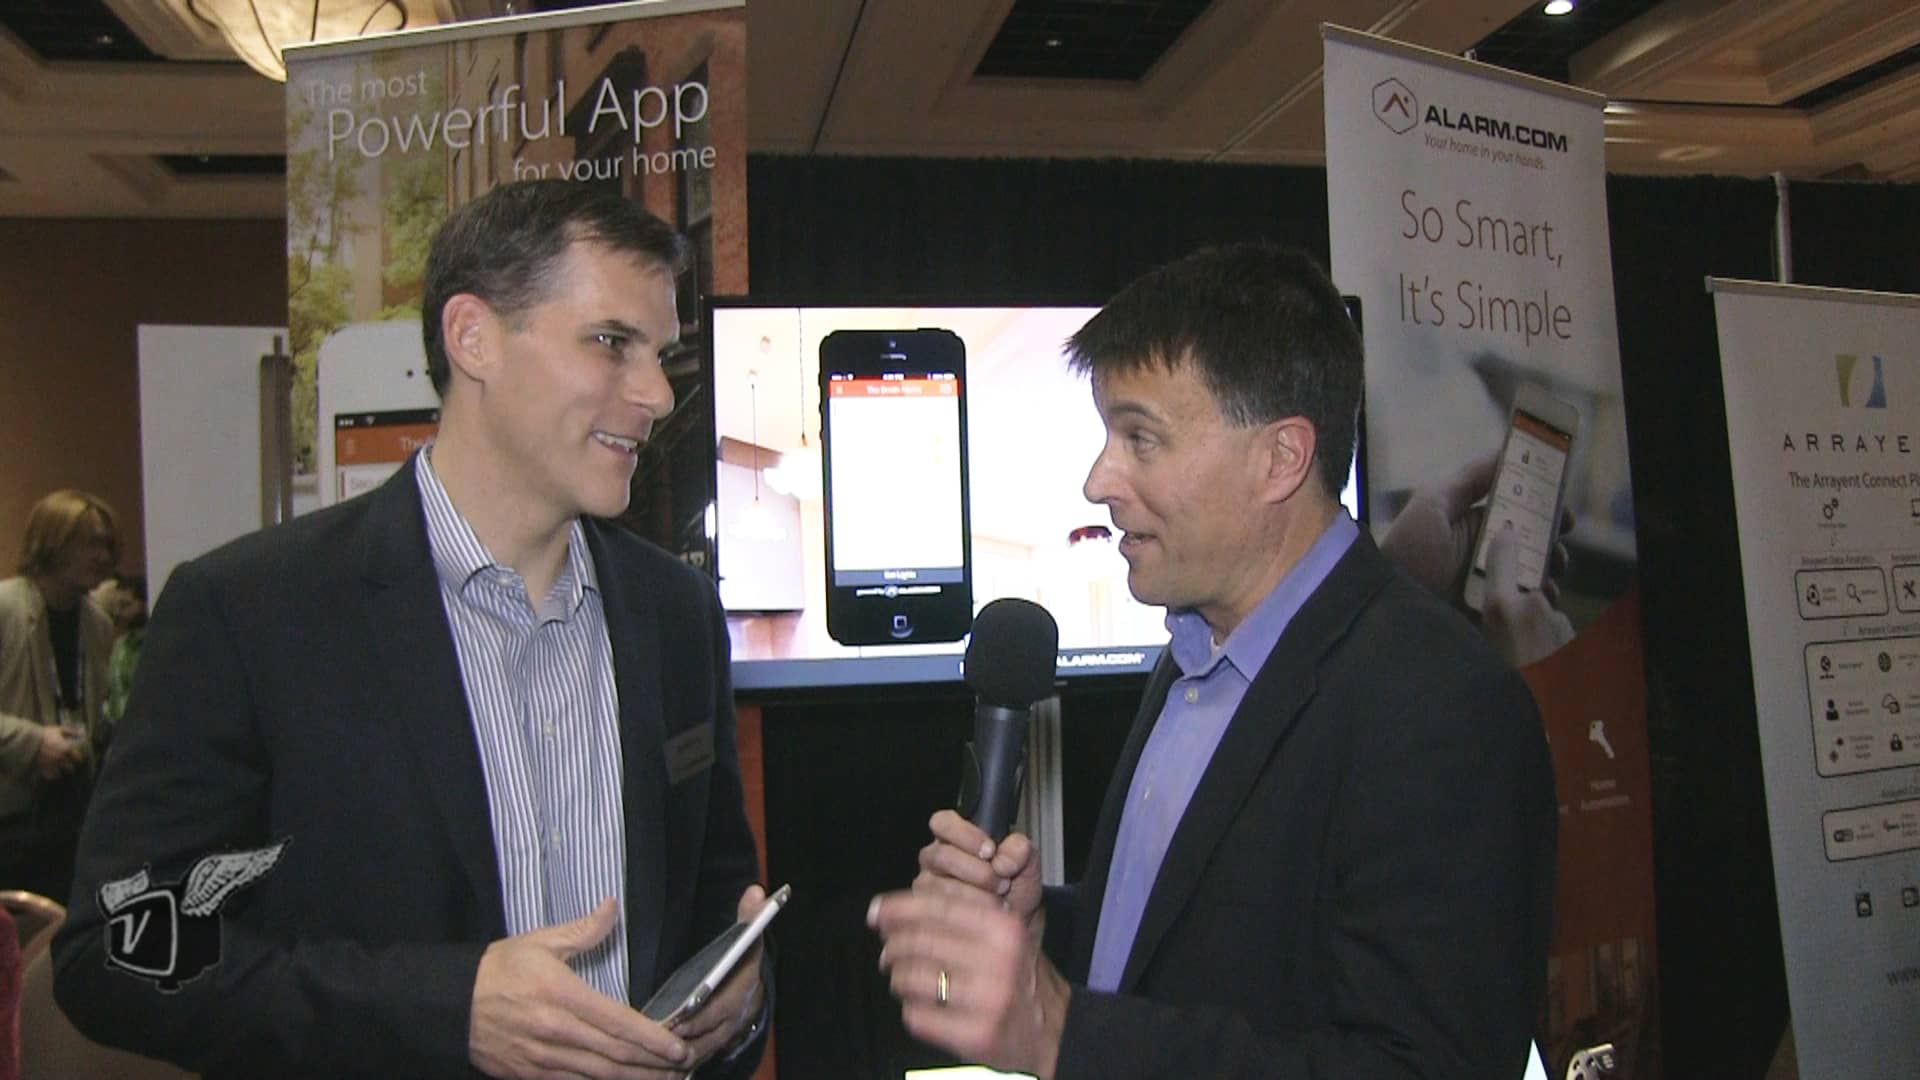 Ken Pyle interviews Jay Kenny of Alarm.com at CES Unveiled 2014.